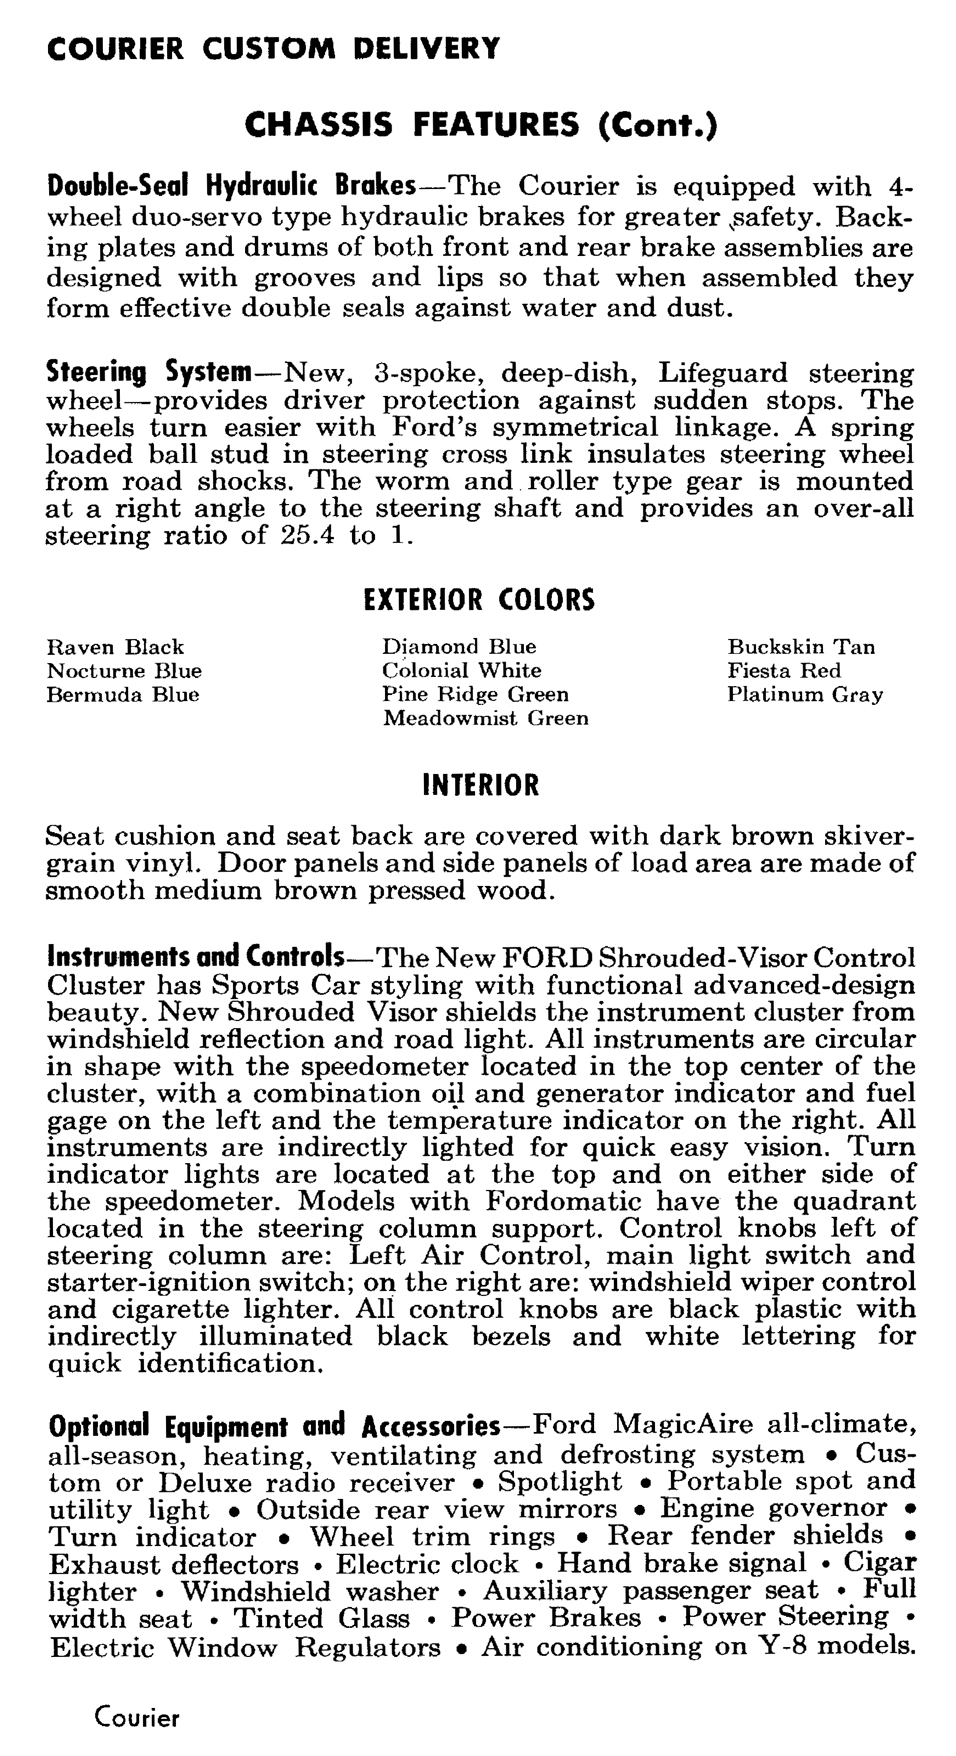 1956 Ford Courier (Sedan Delivery) - Chassis Features page 2 of 2